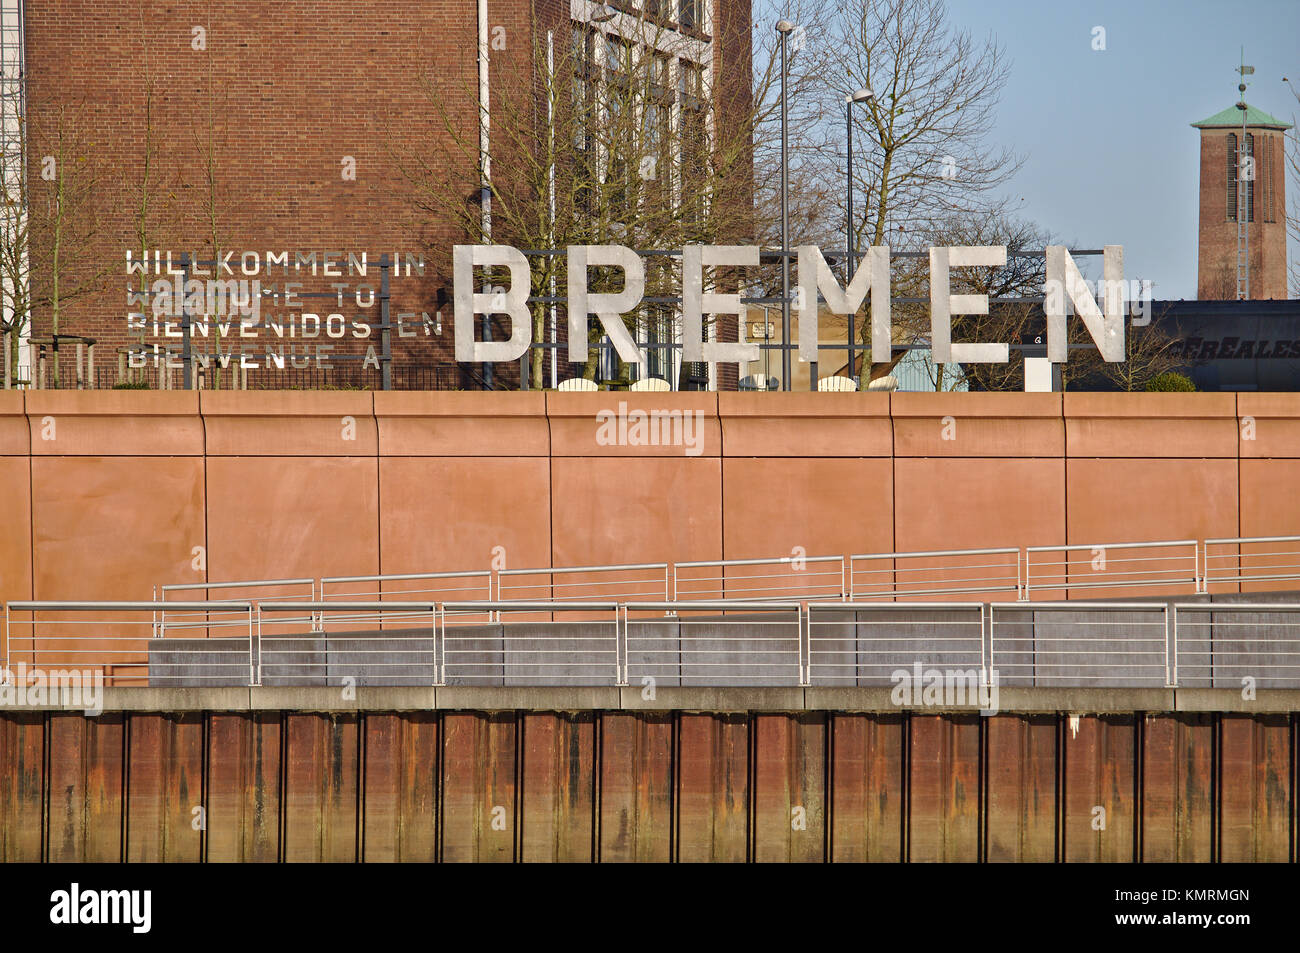 Bremen, Germany - November 25th, 2017 - Large metal sign saying Welcome to Bremen in German, English, Spanish and French mounted on brown concrete wal Stock Photo